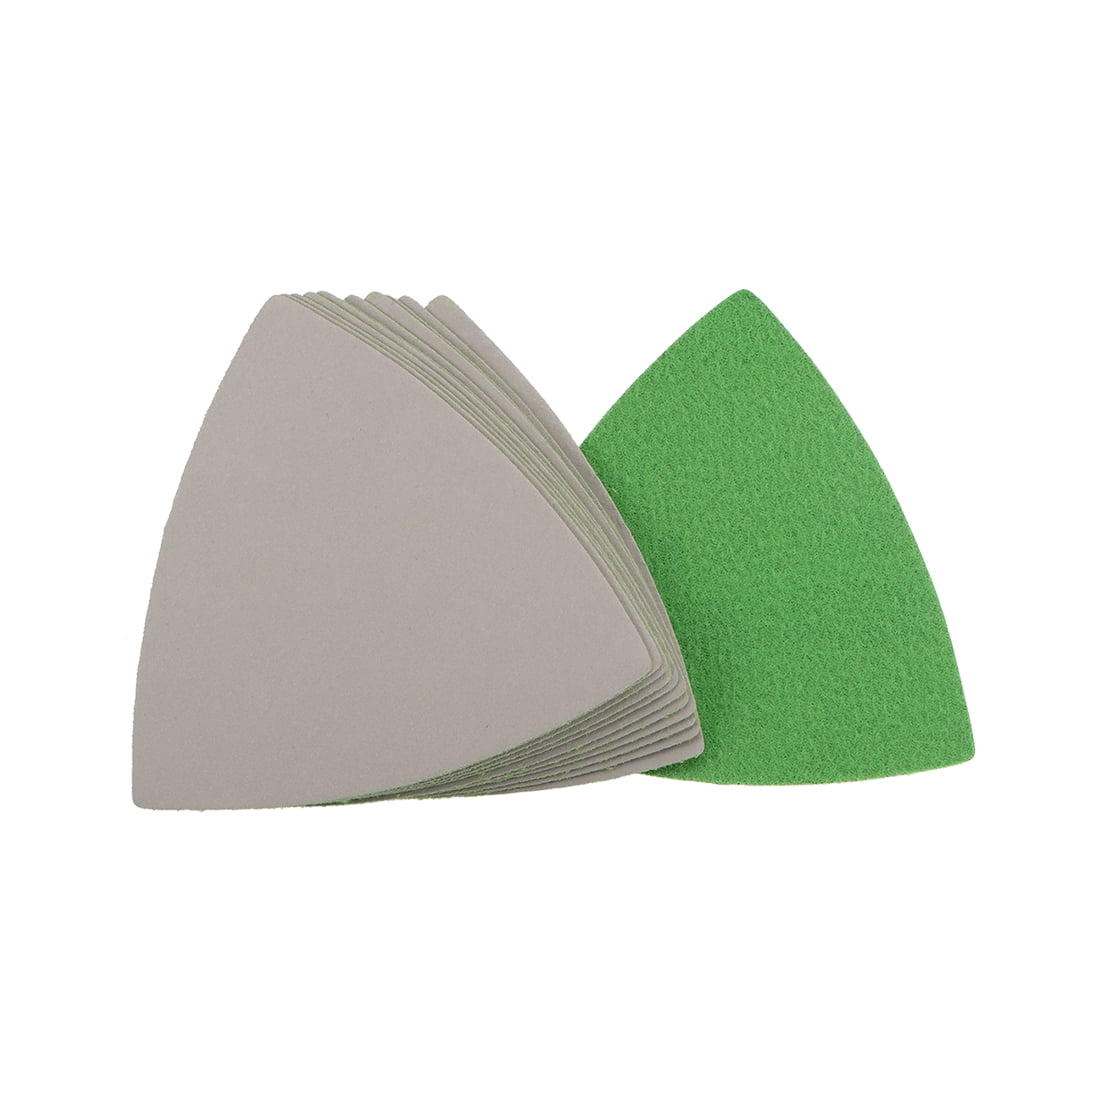 uxcell Triangle Detail Sander Sandpaper Hook and Loop 3-1/2 Inch Silicon Carbide Sanding Pad 3000 Grit 3 Pcs 